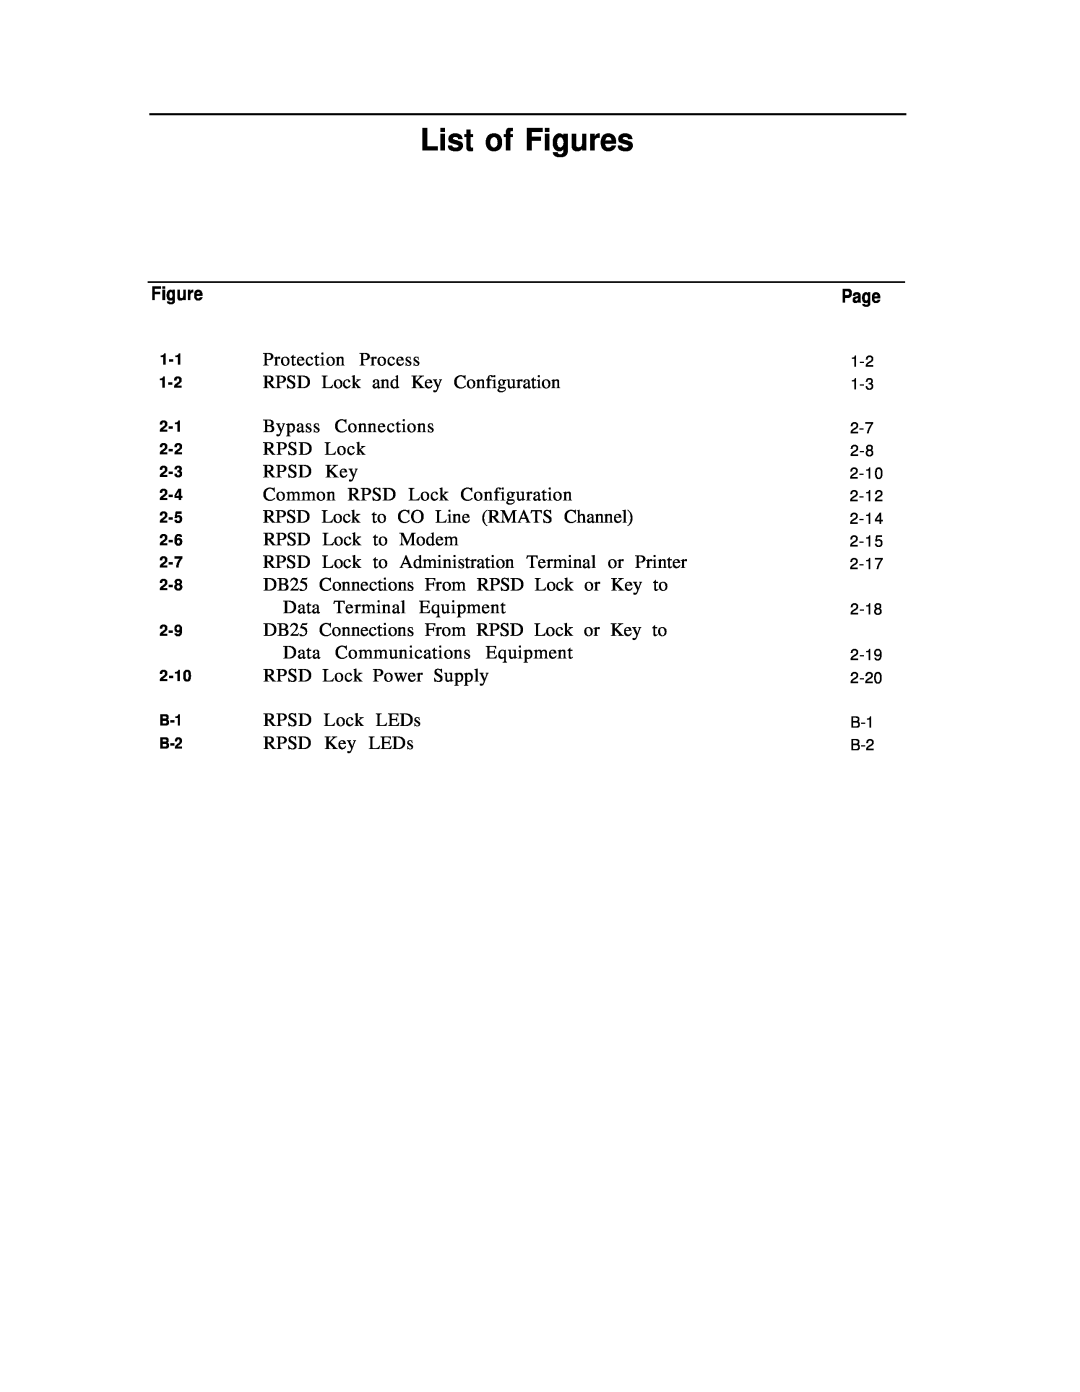 AT&T Remote Port Security Device user manual List of Figures, Page 